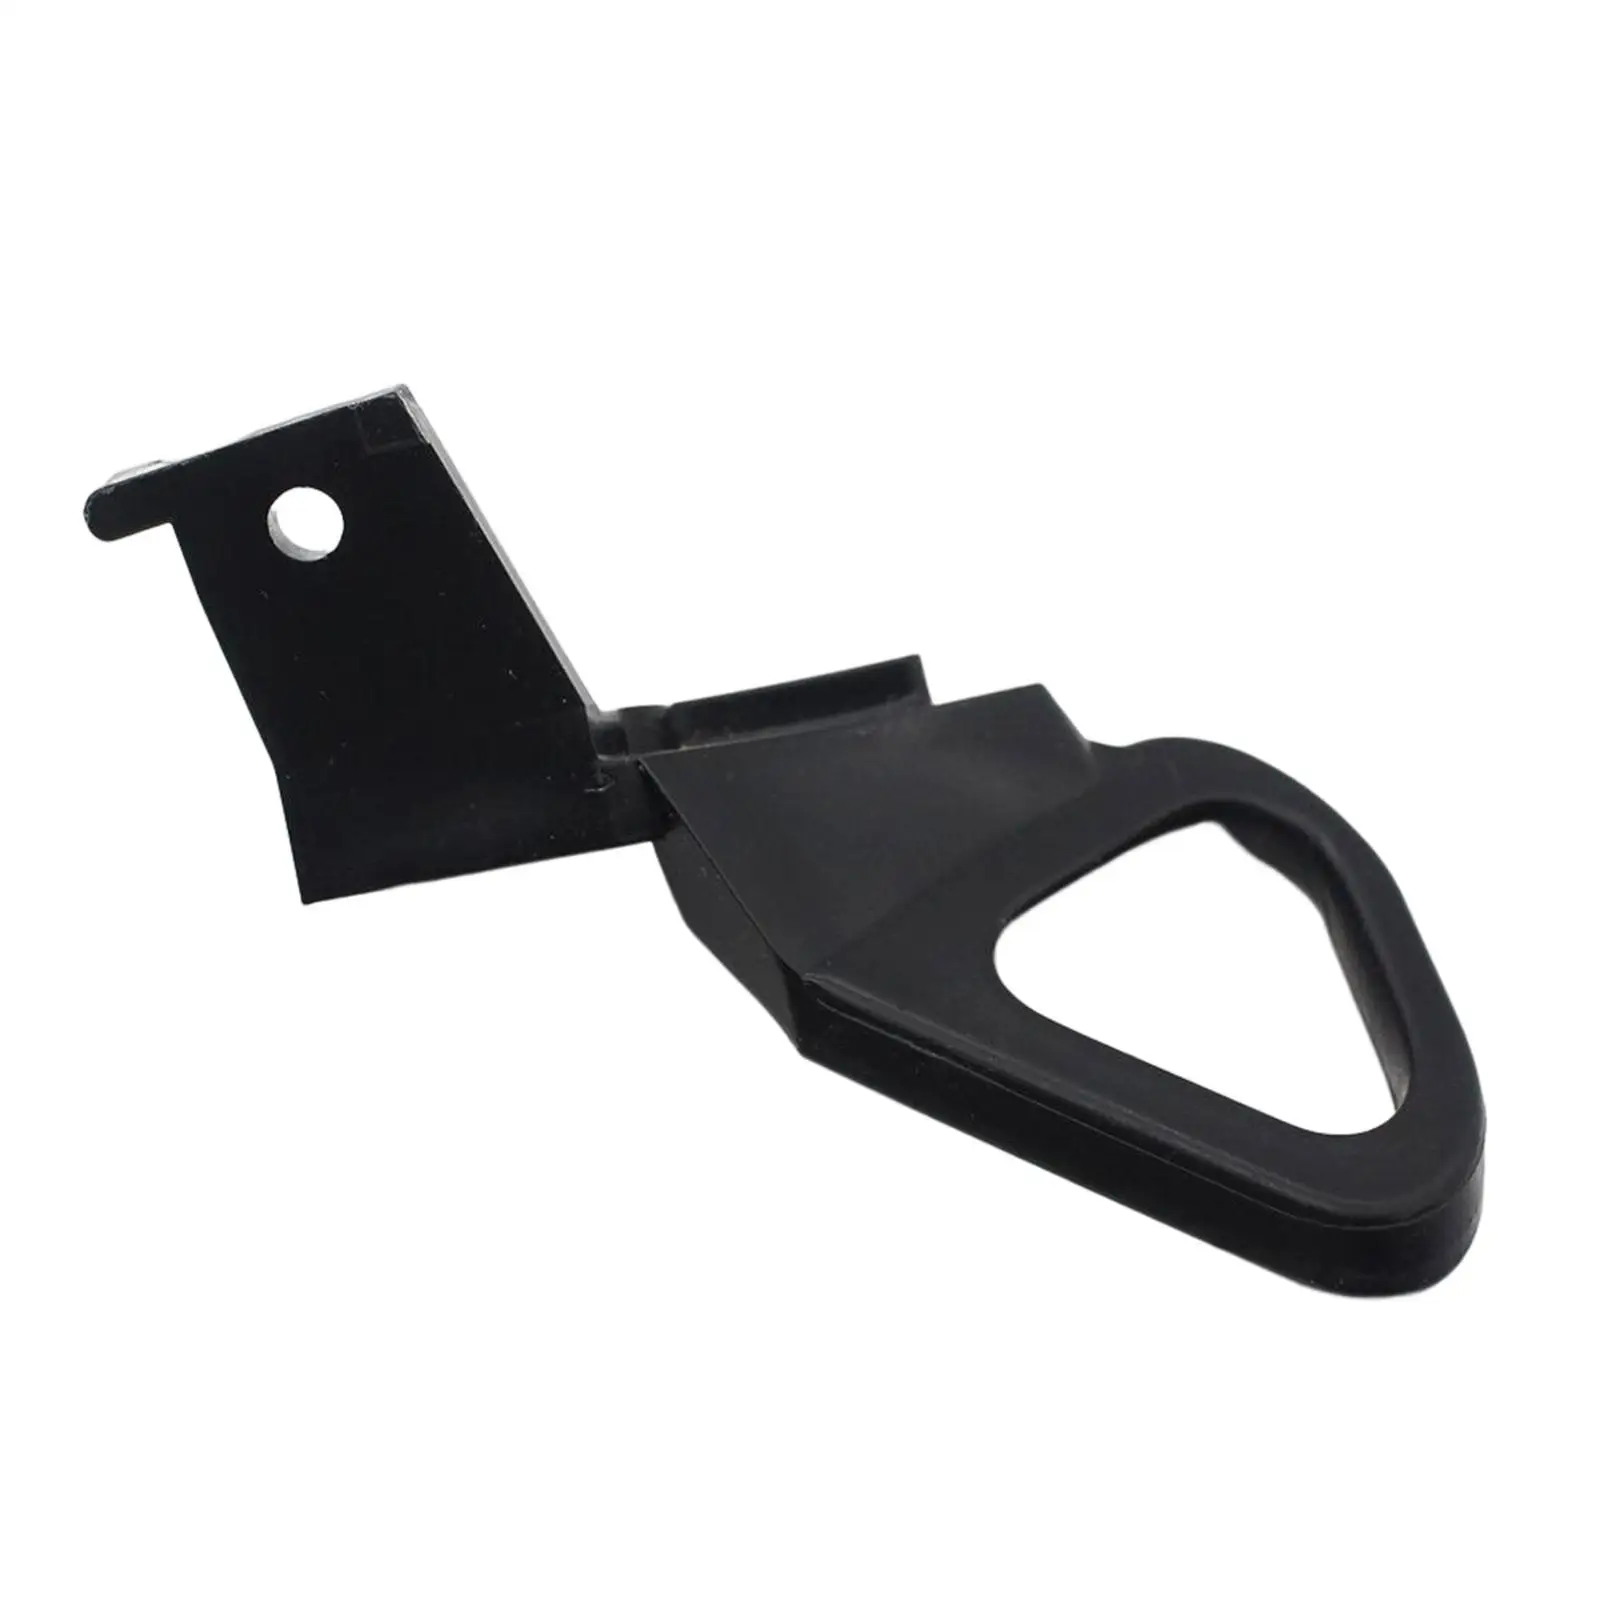 Black Oil Cup Bracket Durable Professional Replaces Motorcycle Accessories Oil